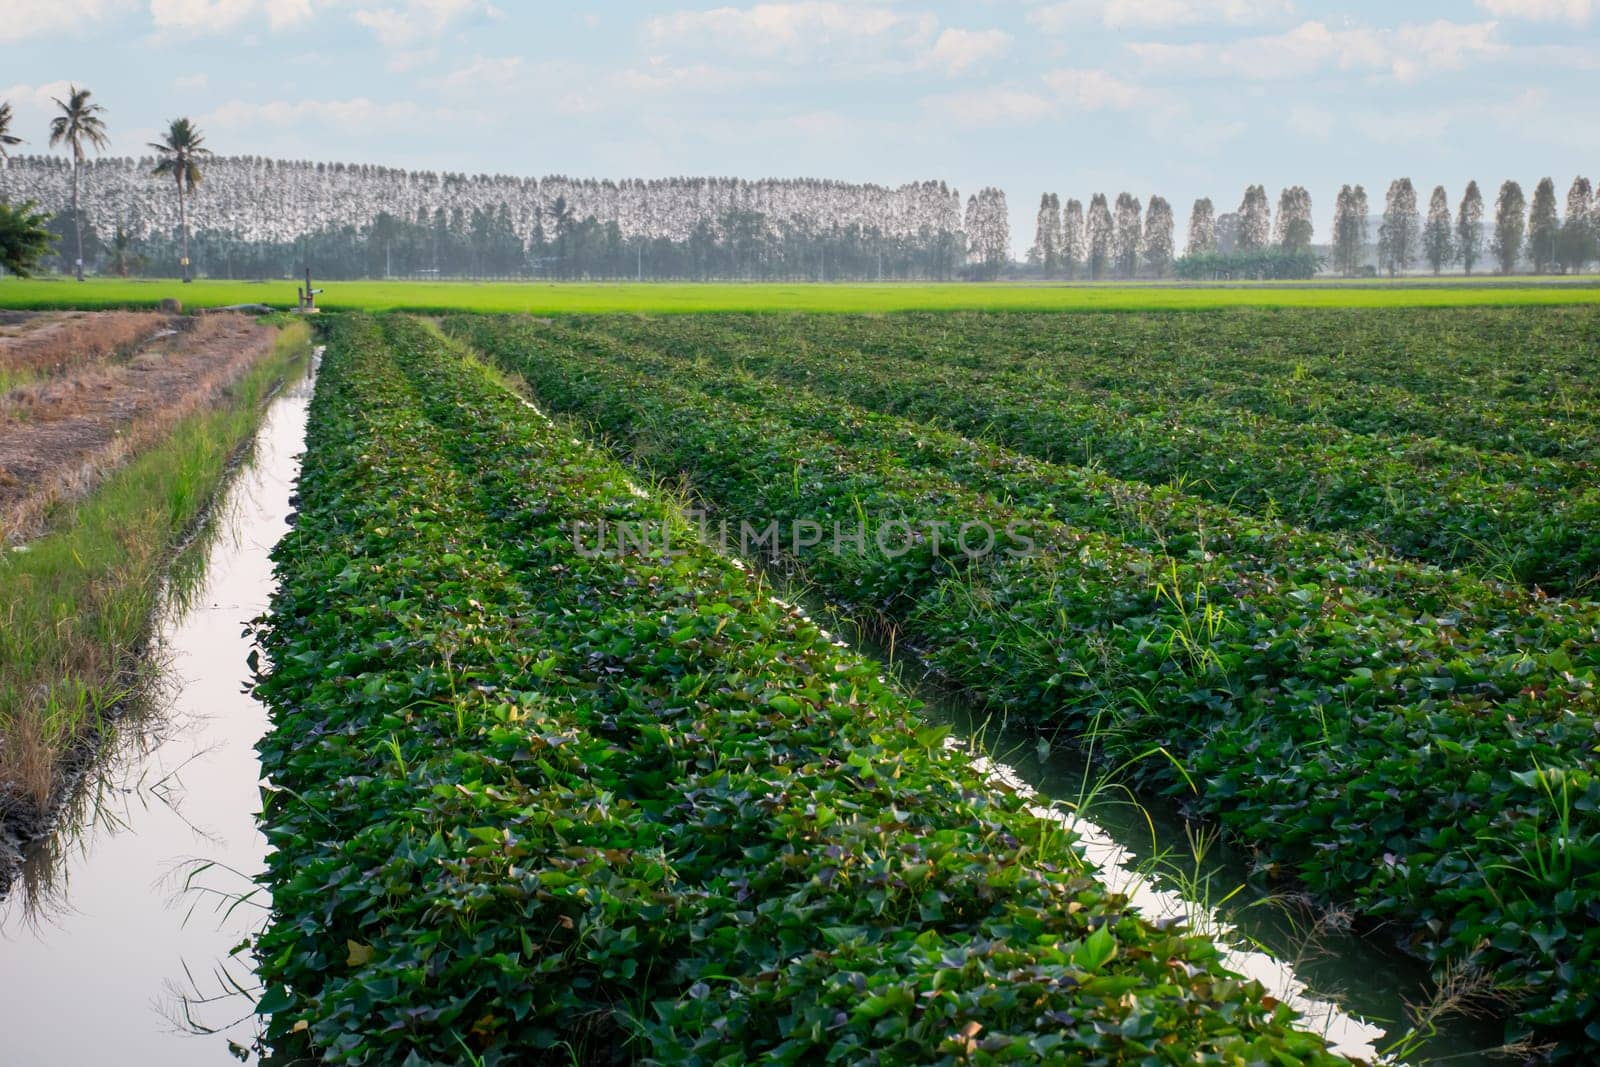 Nature of sweet potatoes plantation or yam farming on rural land green color lush growing is a agriculture in asia